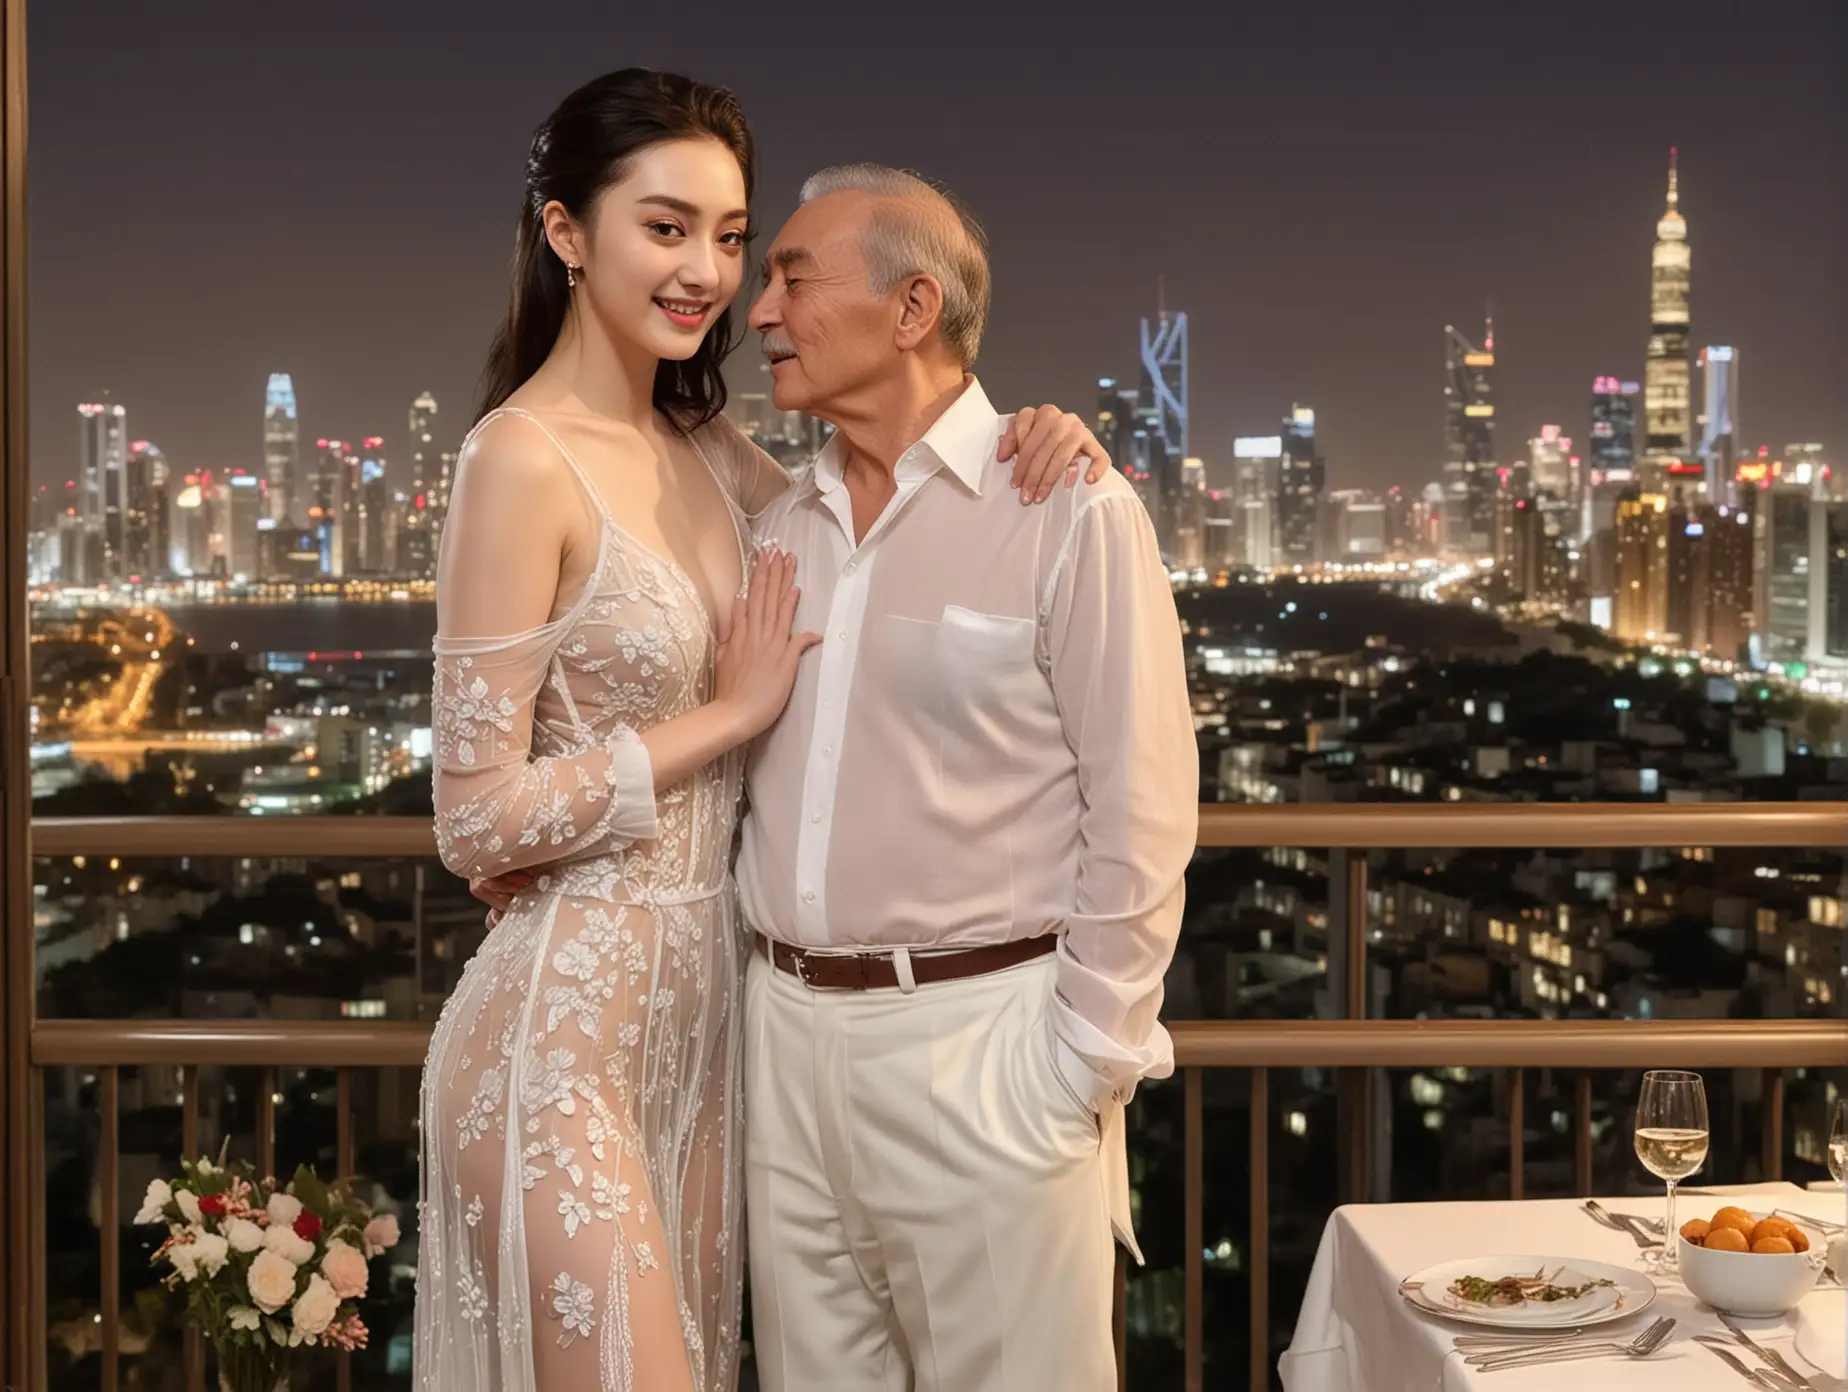 Jing Tian in see through gown with an older man in white shirt hugging, her hands are in his neck, his hands are in her waist, flower in her hair, romantic dinner date, couple in love, night time, dinner, hotel, city panorama.